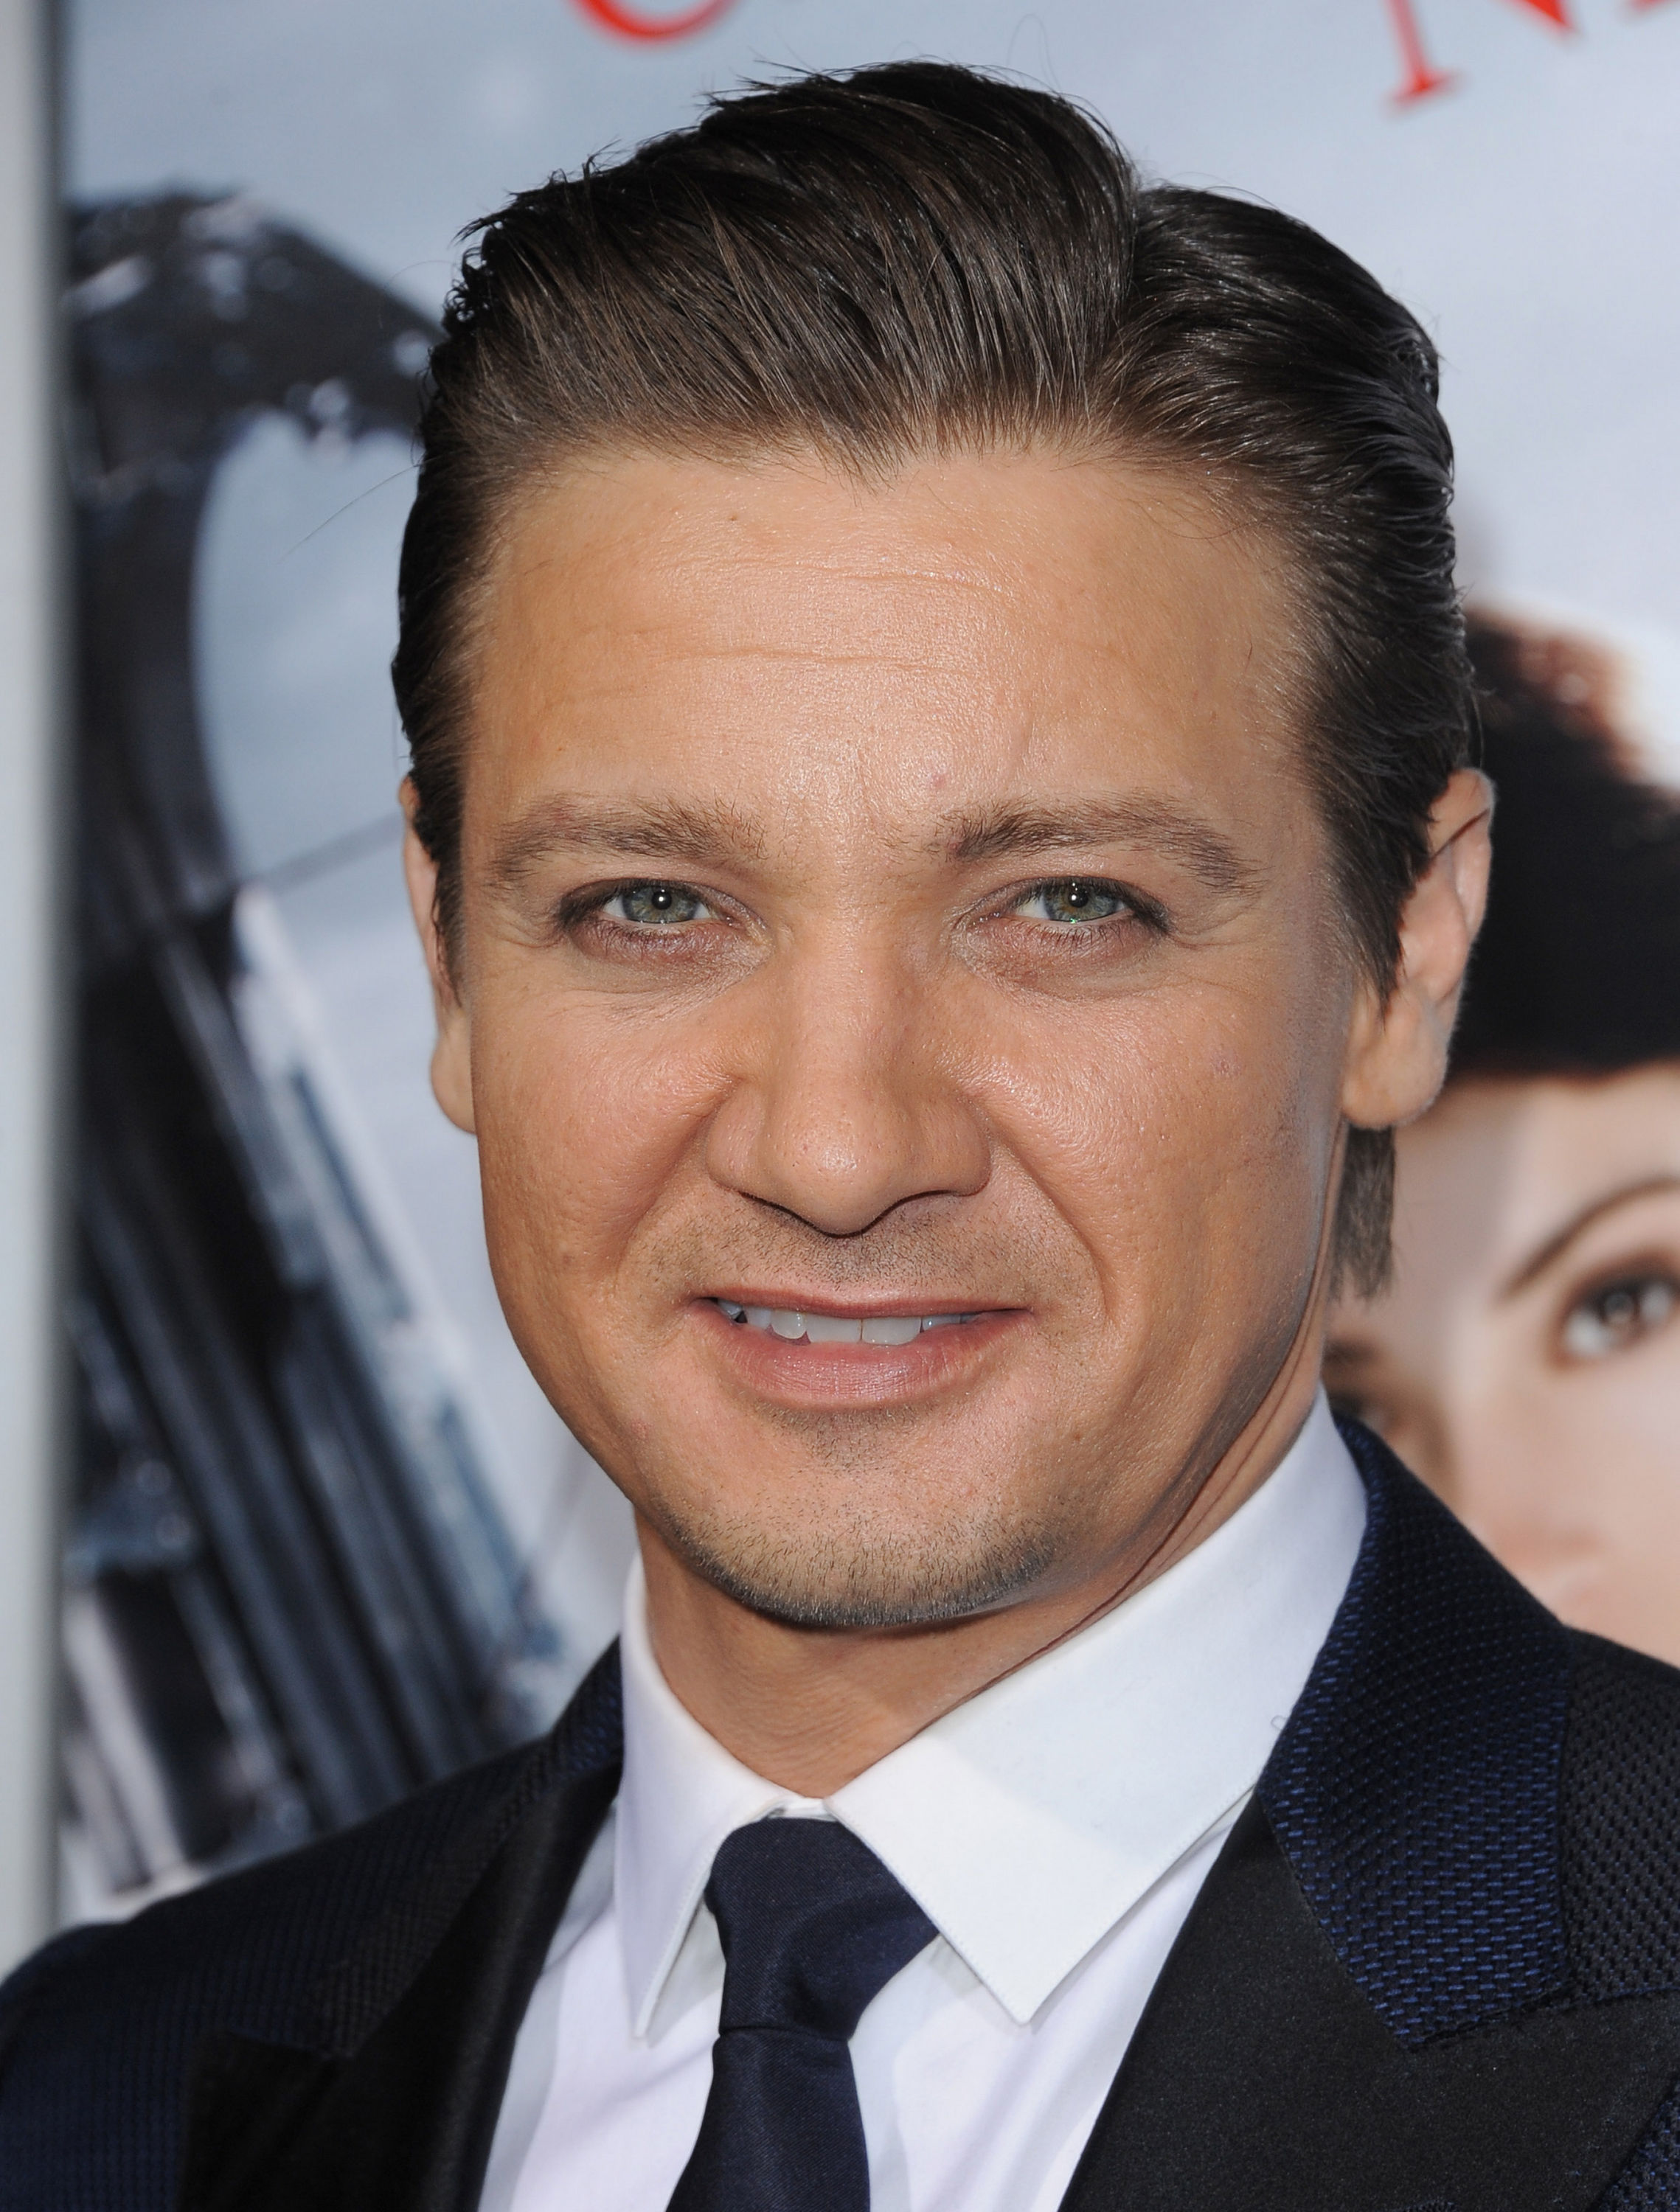 Jeremy Renner photo 953 of 1779 pics, wallpaper - photo #584490 - ThePlace2